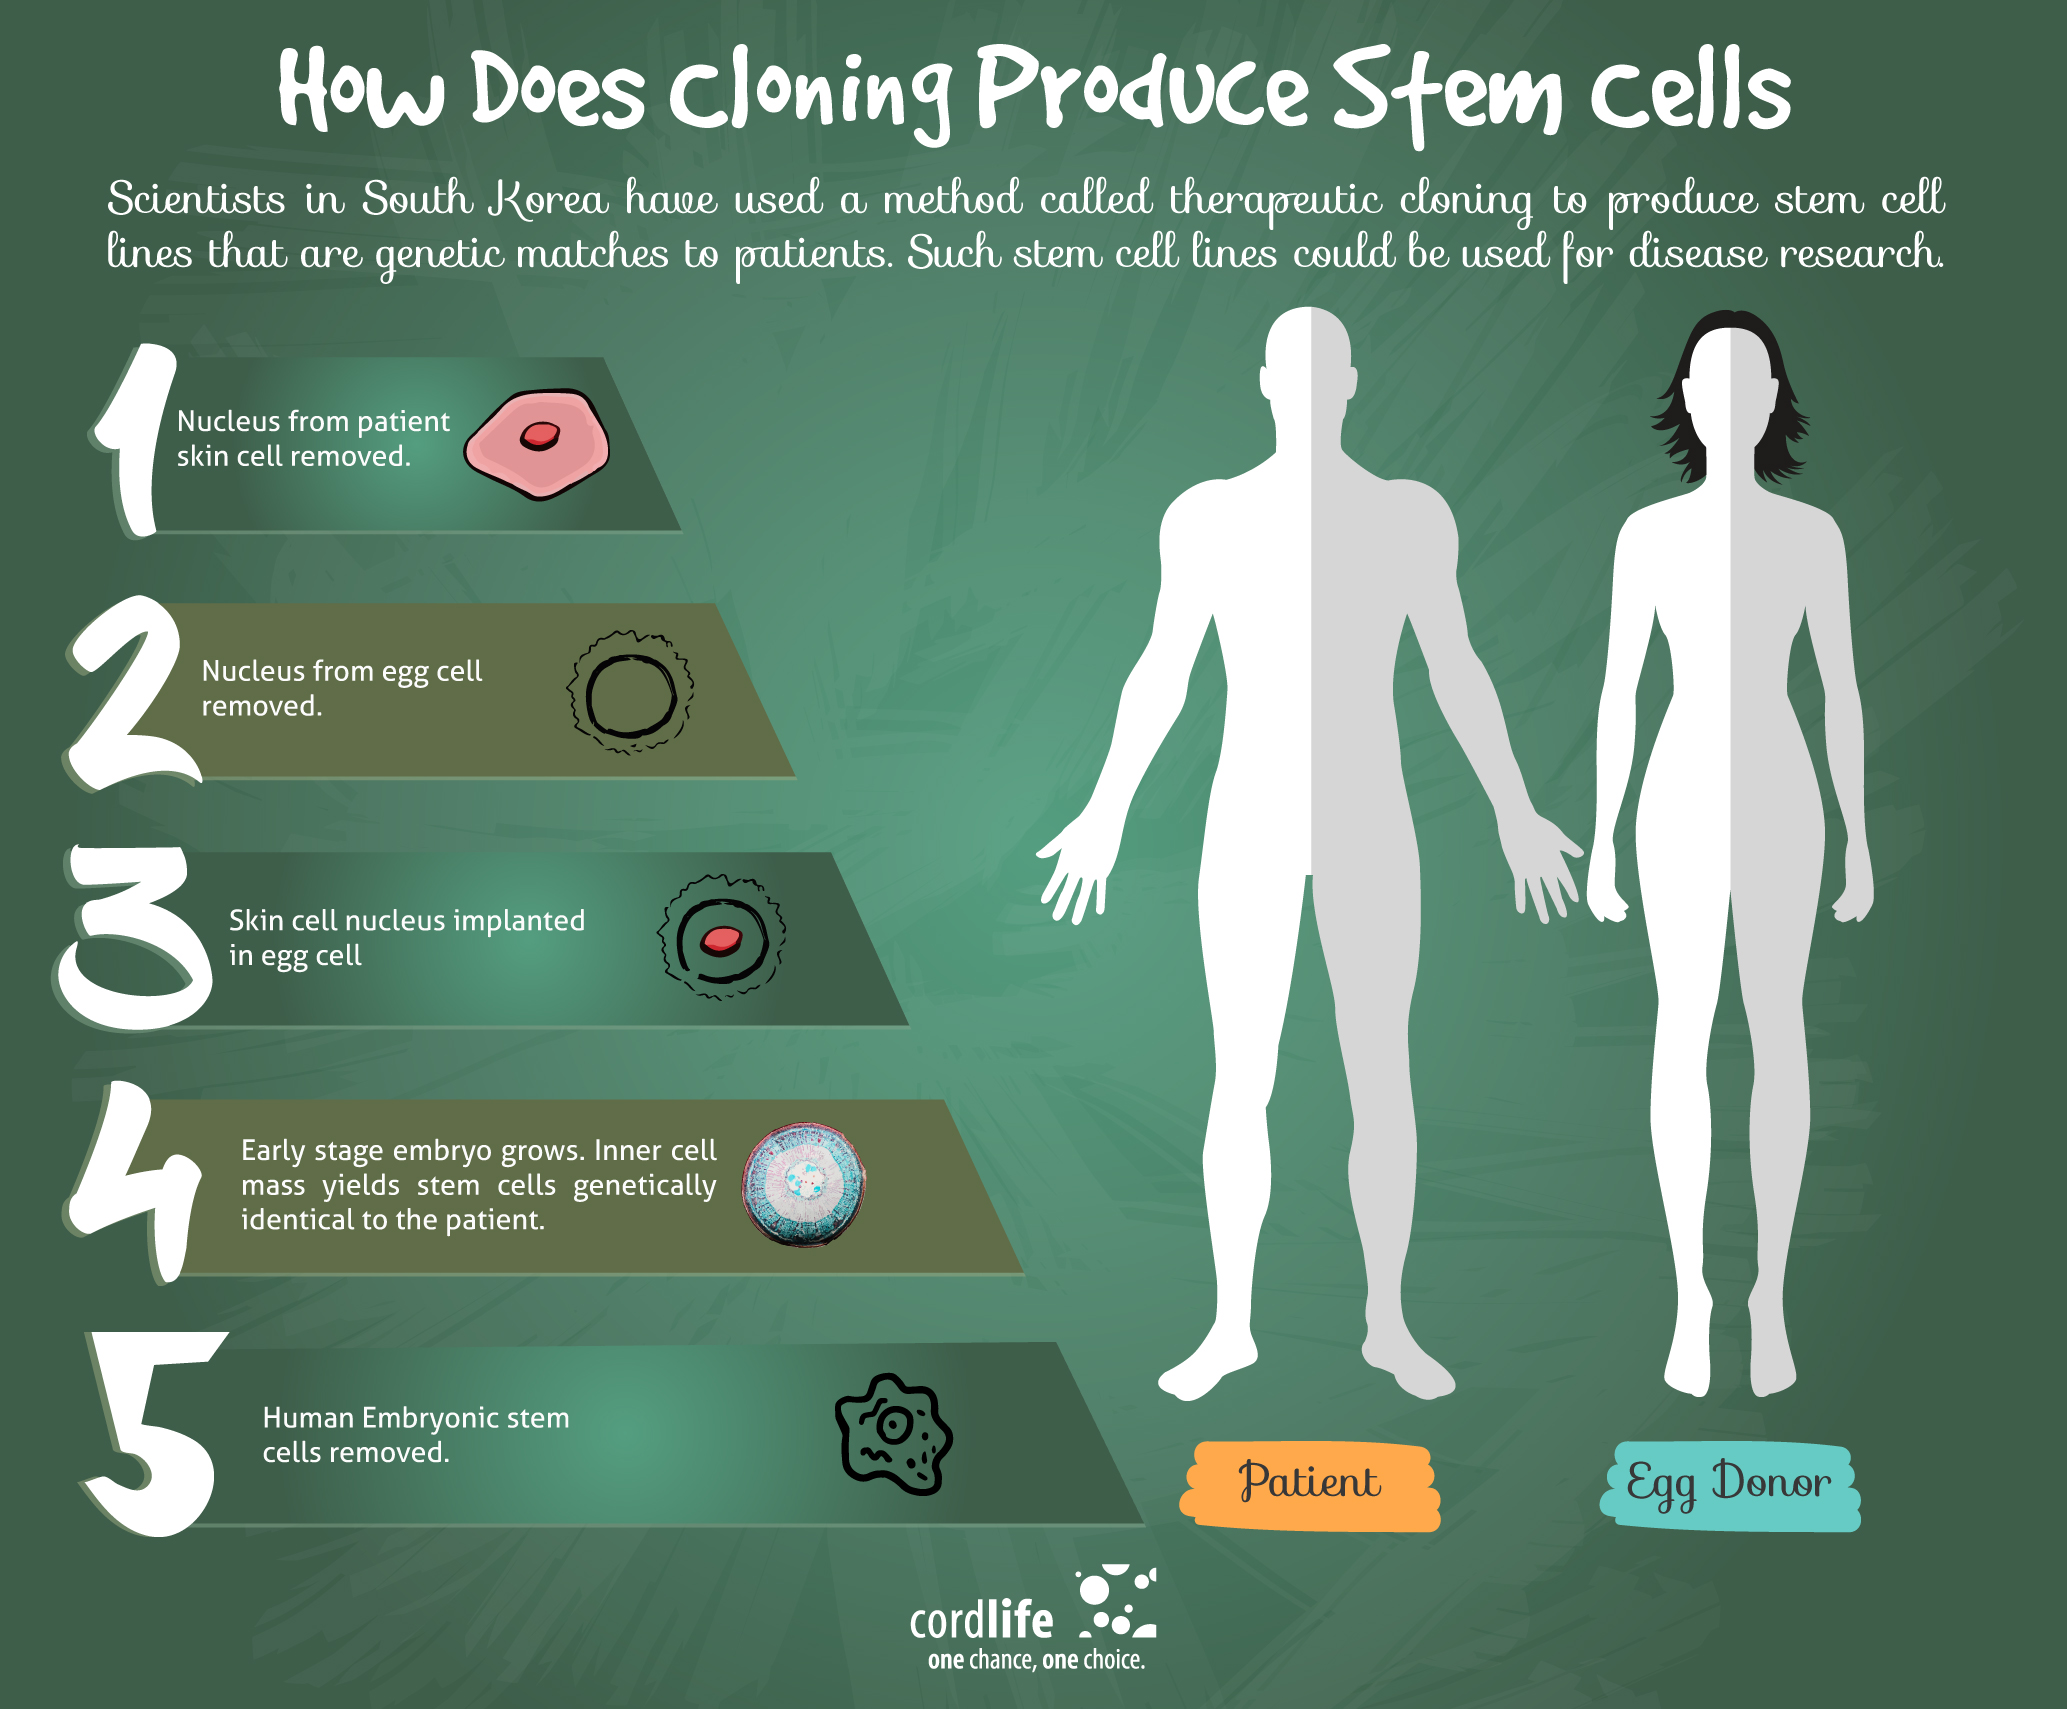 How Does Cloning Produce Stem Cells